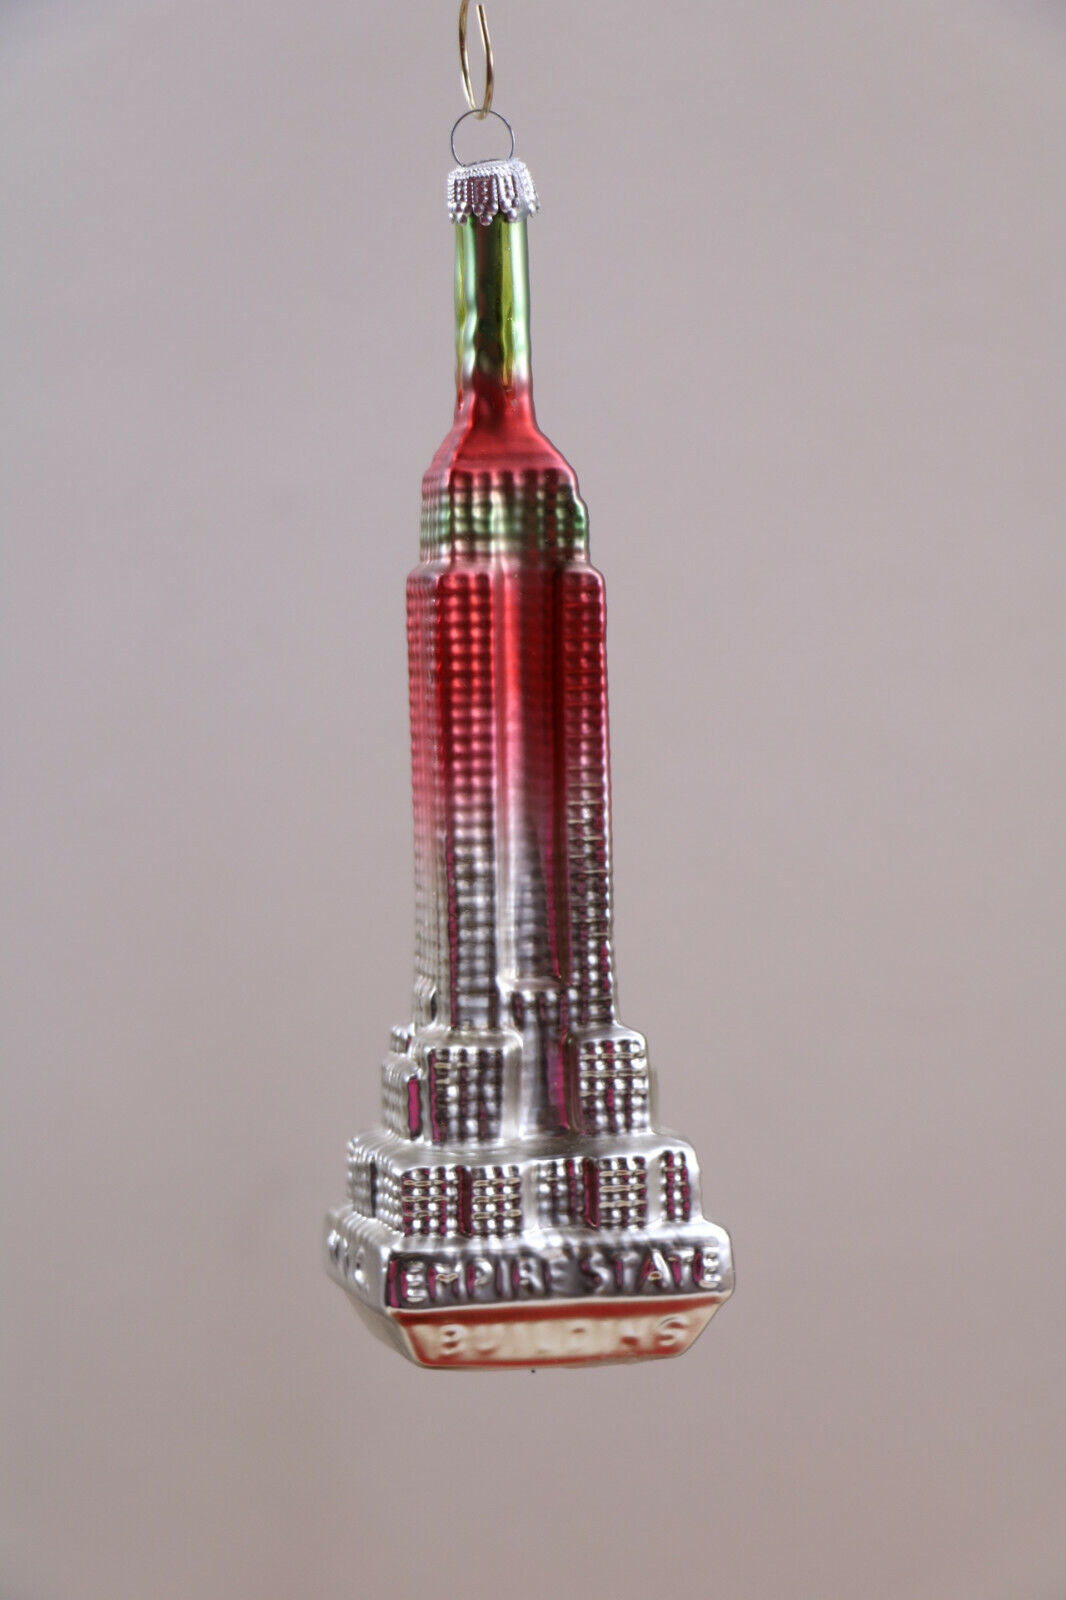 Empire State Building New York Blown Mercury Glass Christmas Ornament Germany - $29.16